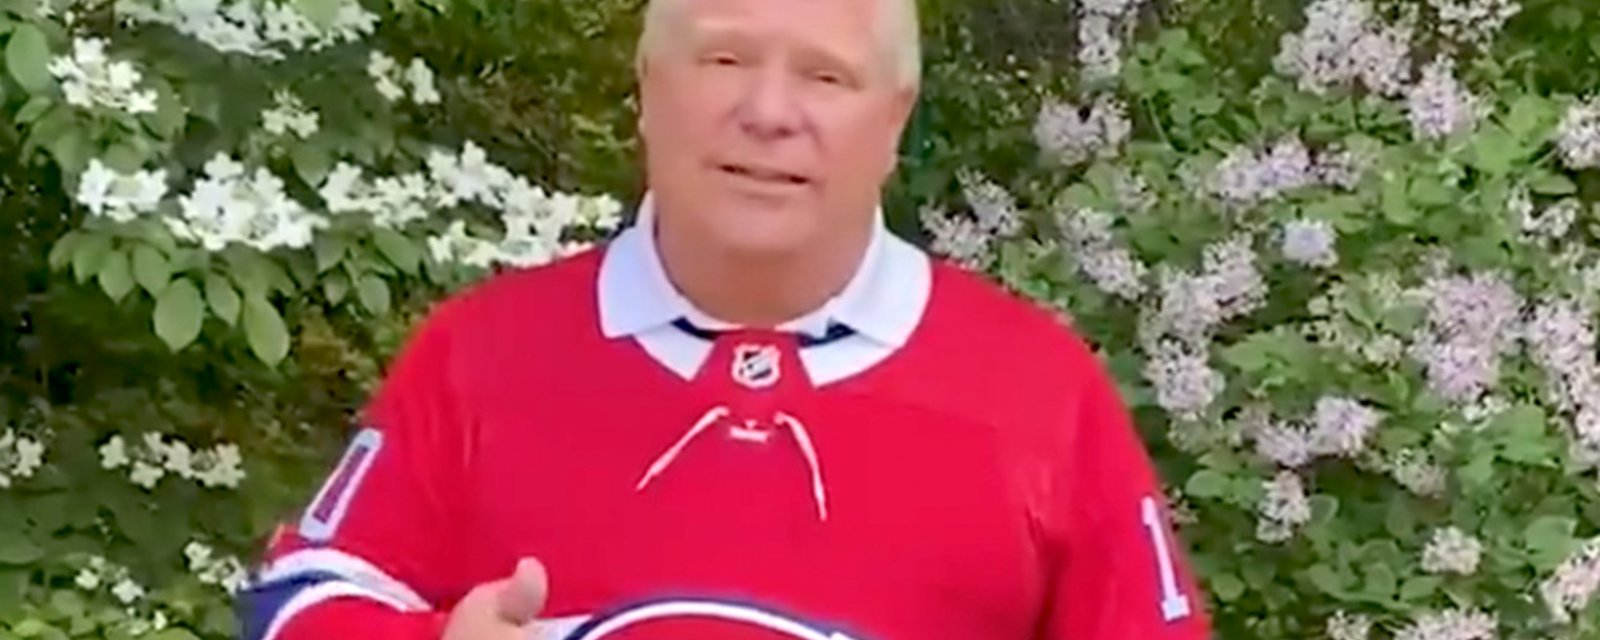 Ontario premier Doug Ford dons Montreal Canadiens jersey after Leafs collapse 